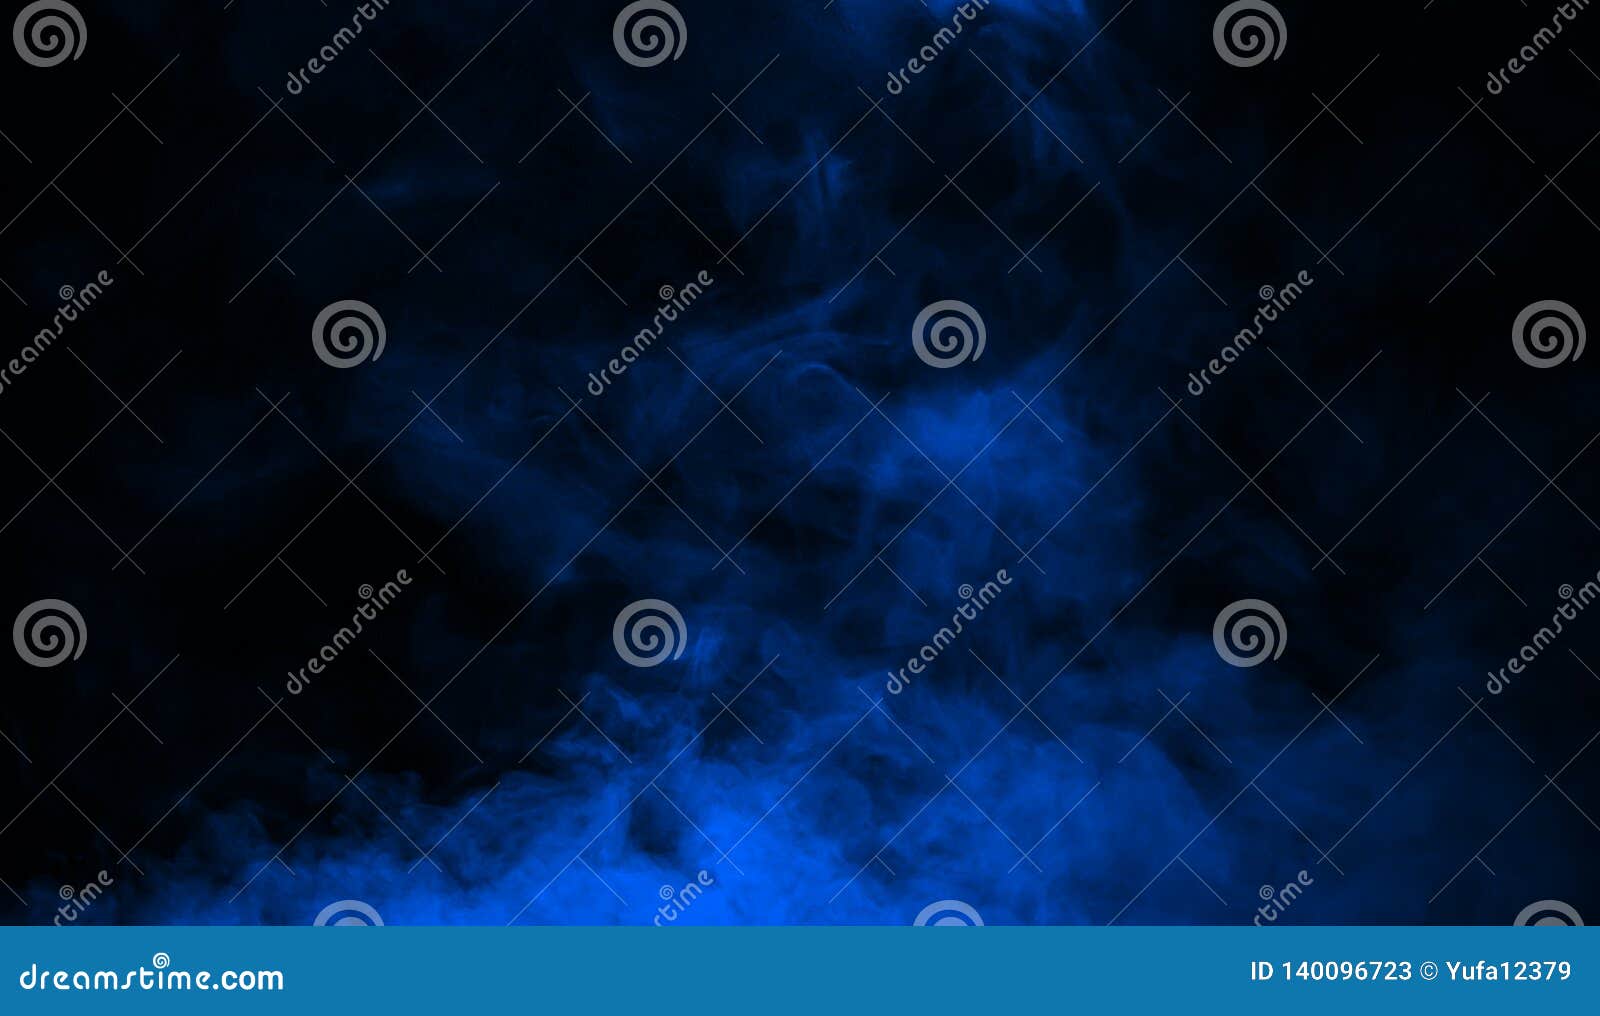 abstract blue smoke mist fog on a black background. texture background for graphic and web